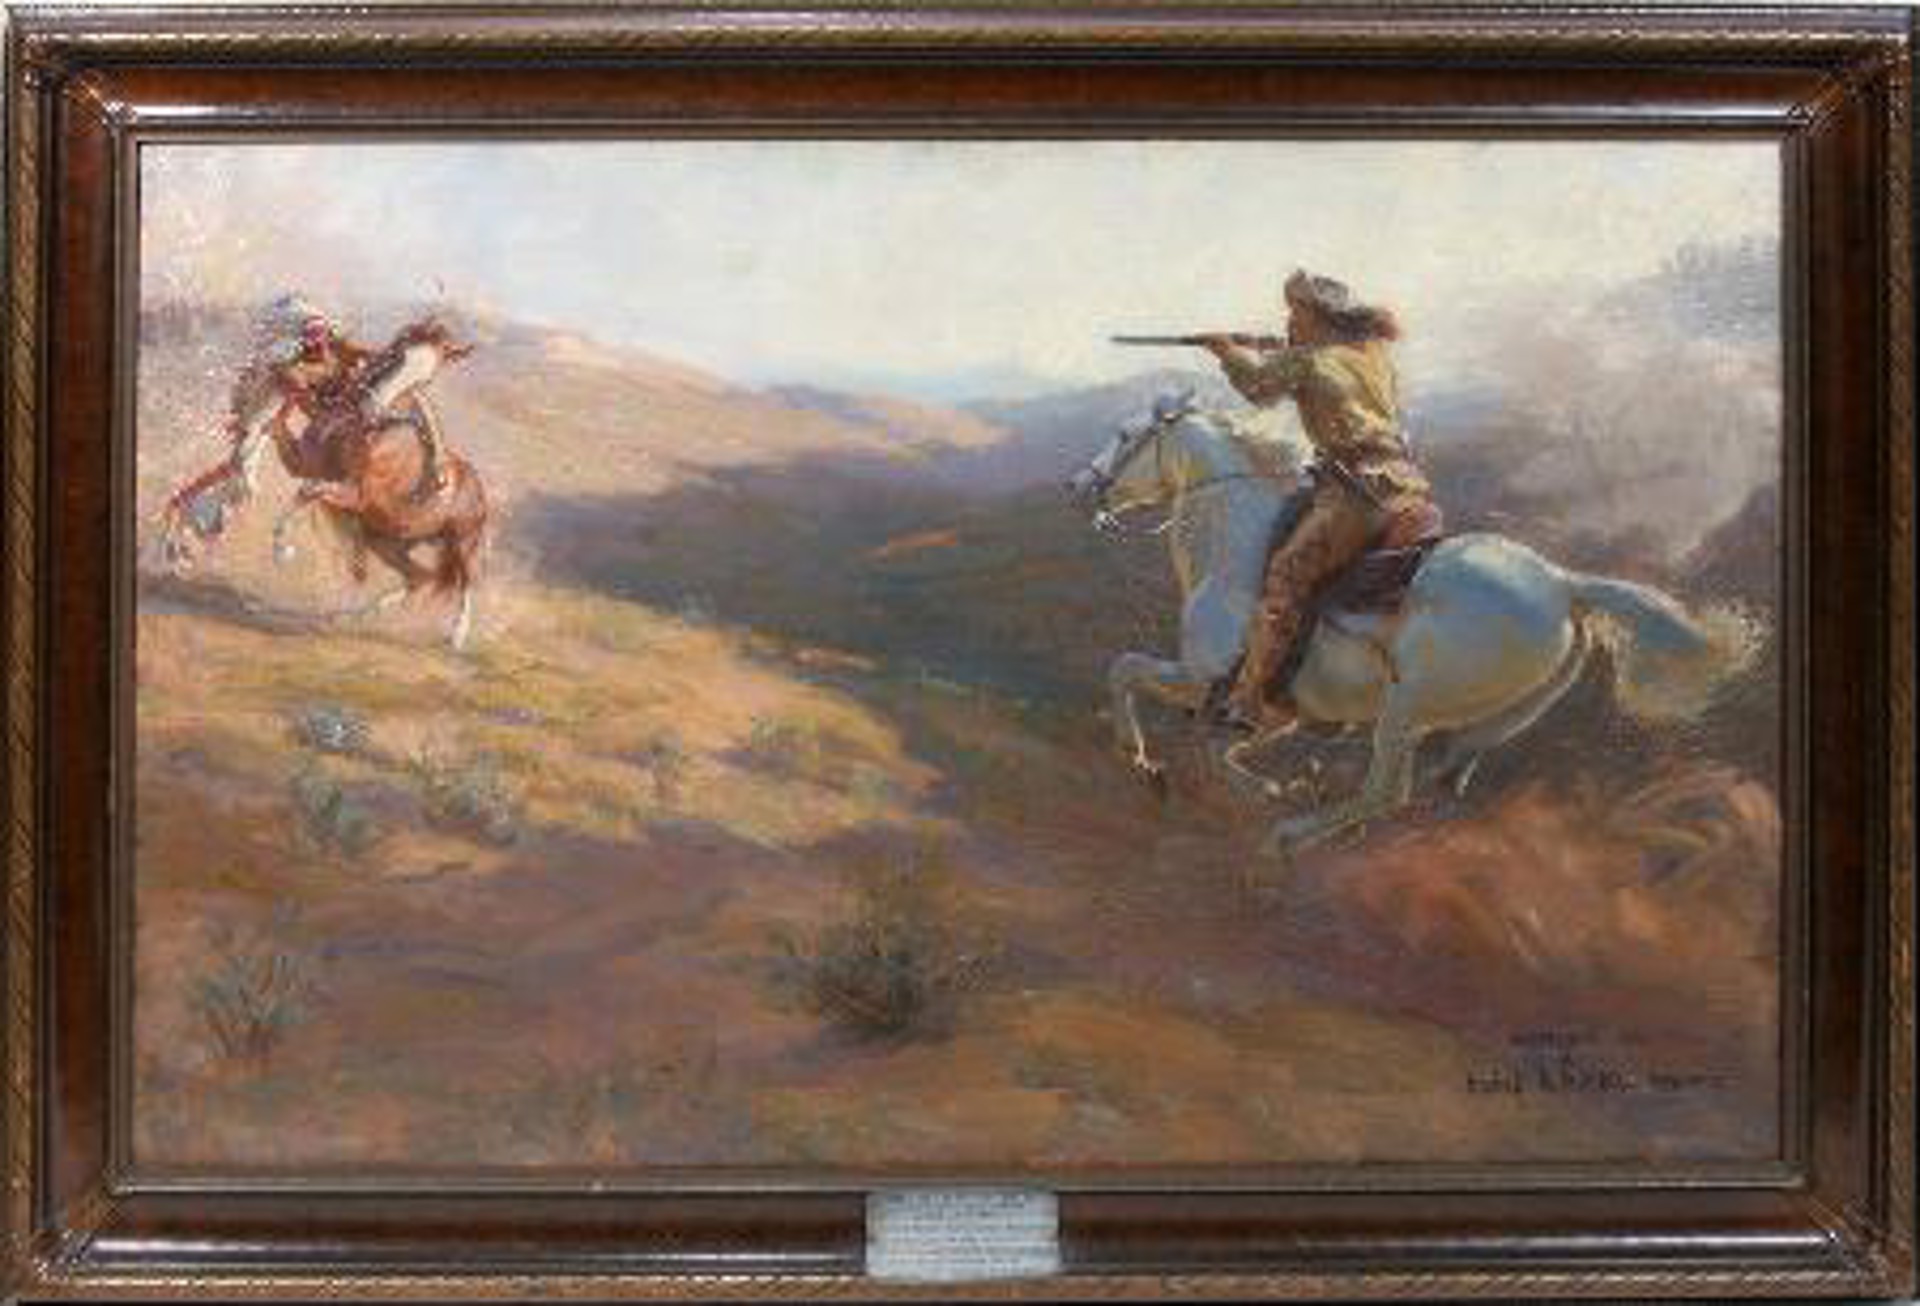 THE FIRST SCALP FOR CUSTER by Irving Reuben Bacon [1875-1962]